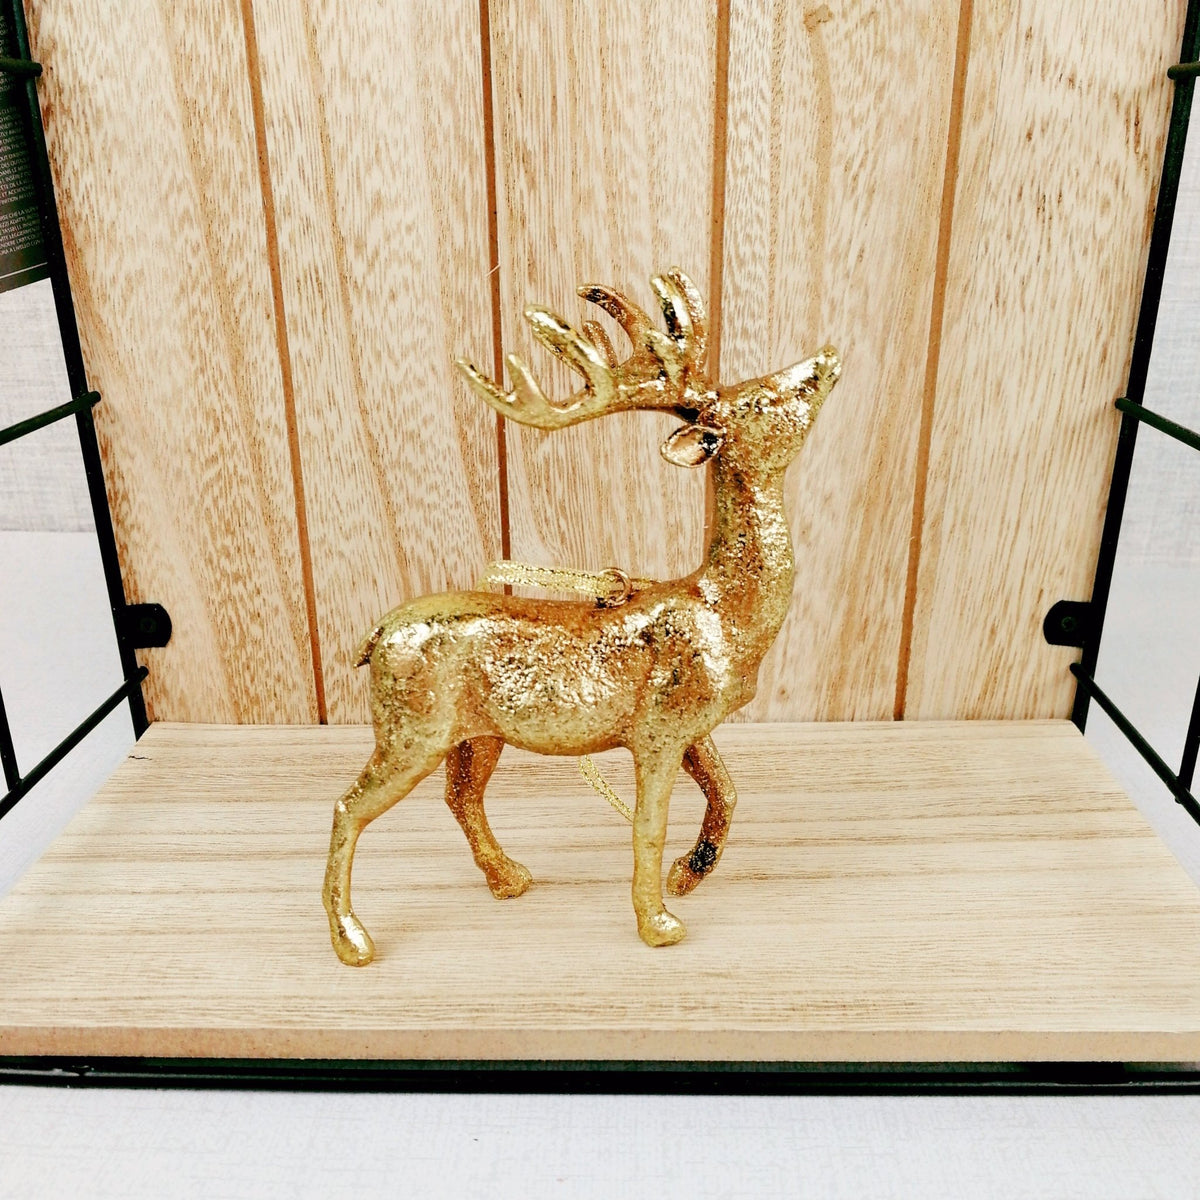 Hanging Gold Stag Christmas Tree Decoration